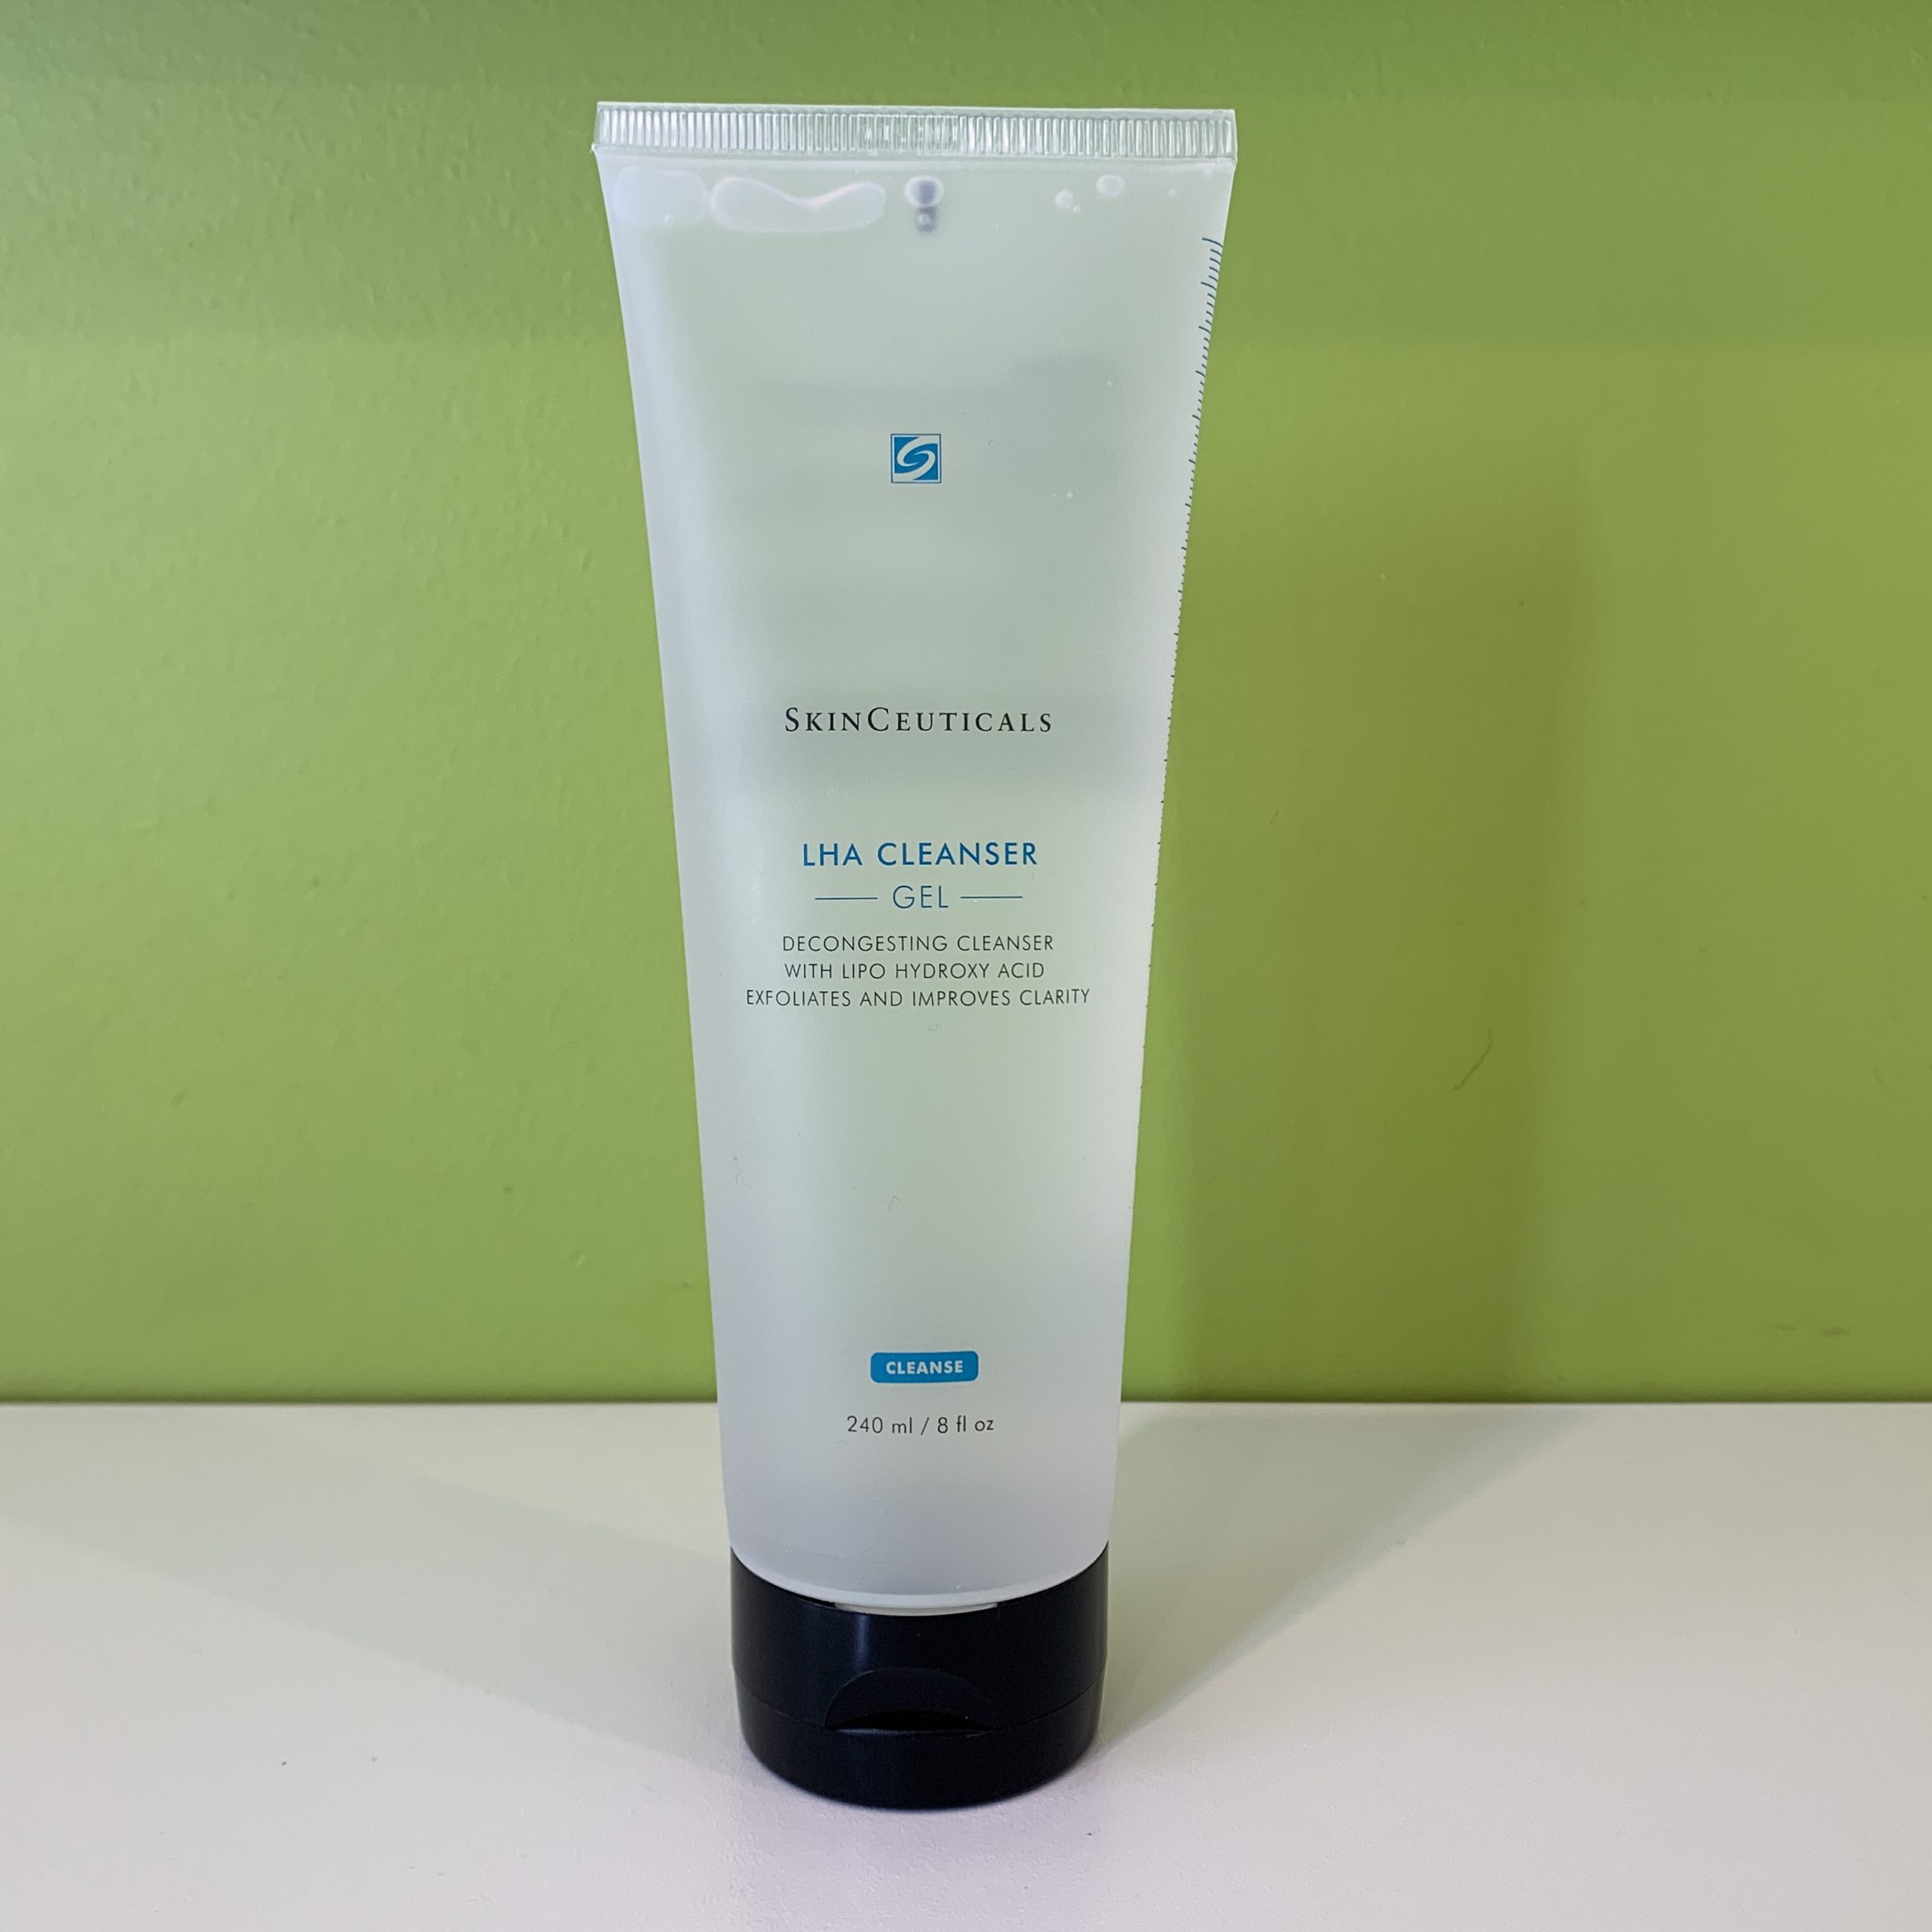 LHA CLEANSING GEL: OUR BEST CLEANSER FOR ACNE PRONE SKIN